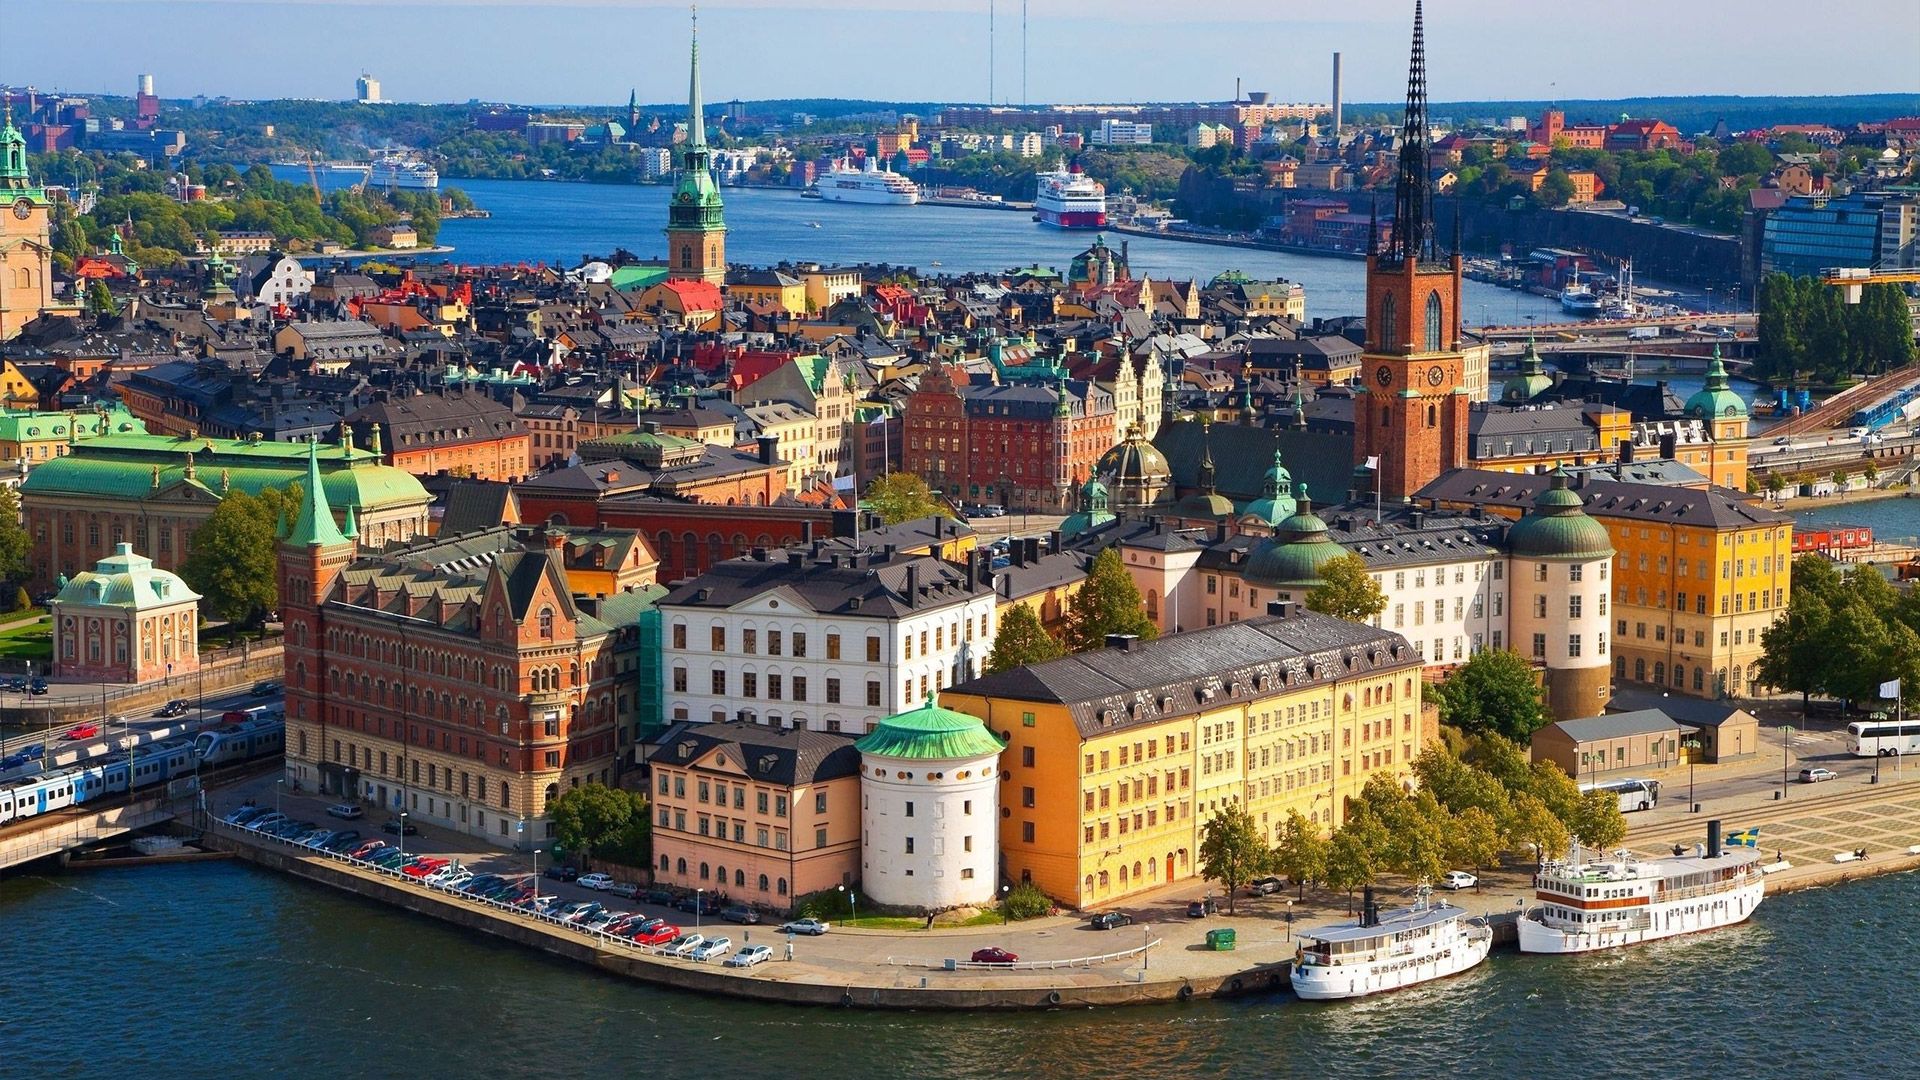 With PayPorter, you can make fast, easy and safe money transfers to Sweden at the most affordable prices!